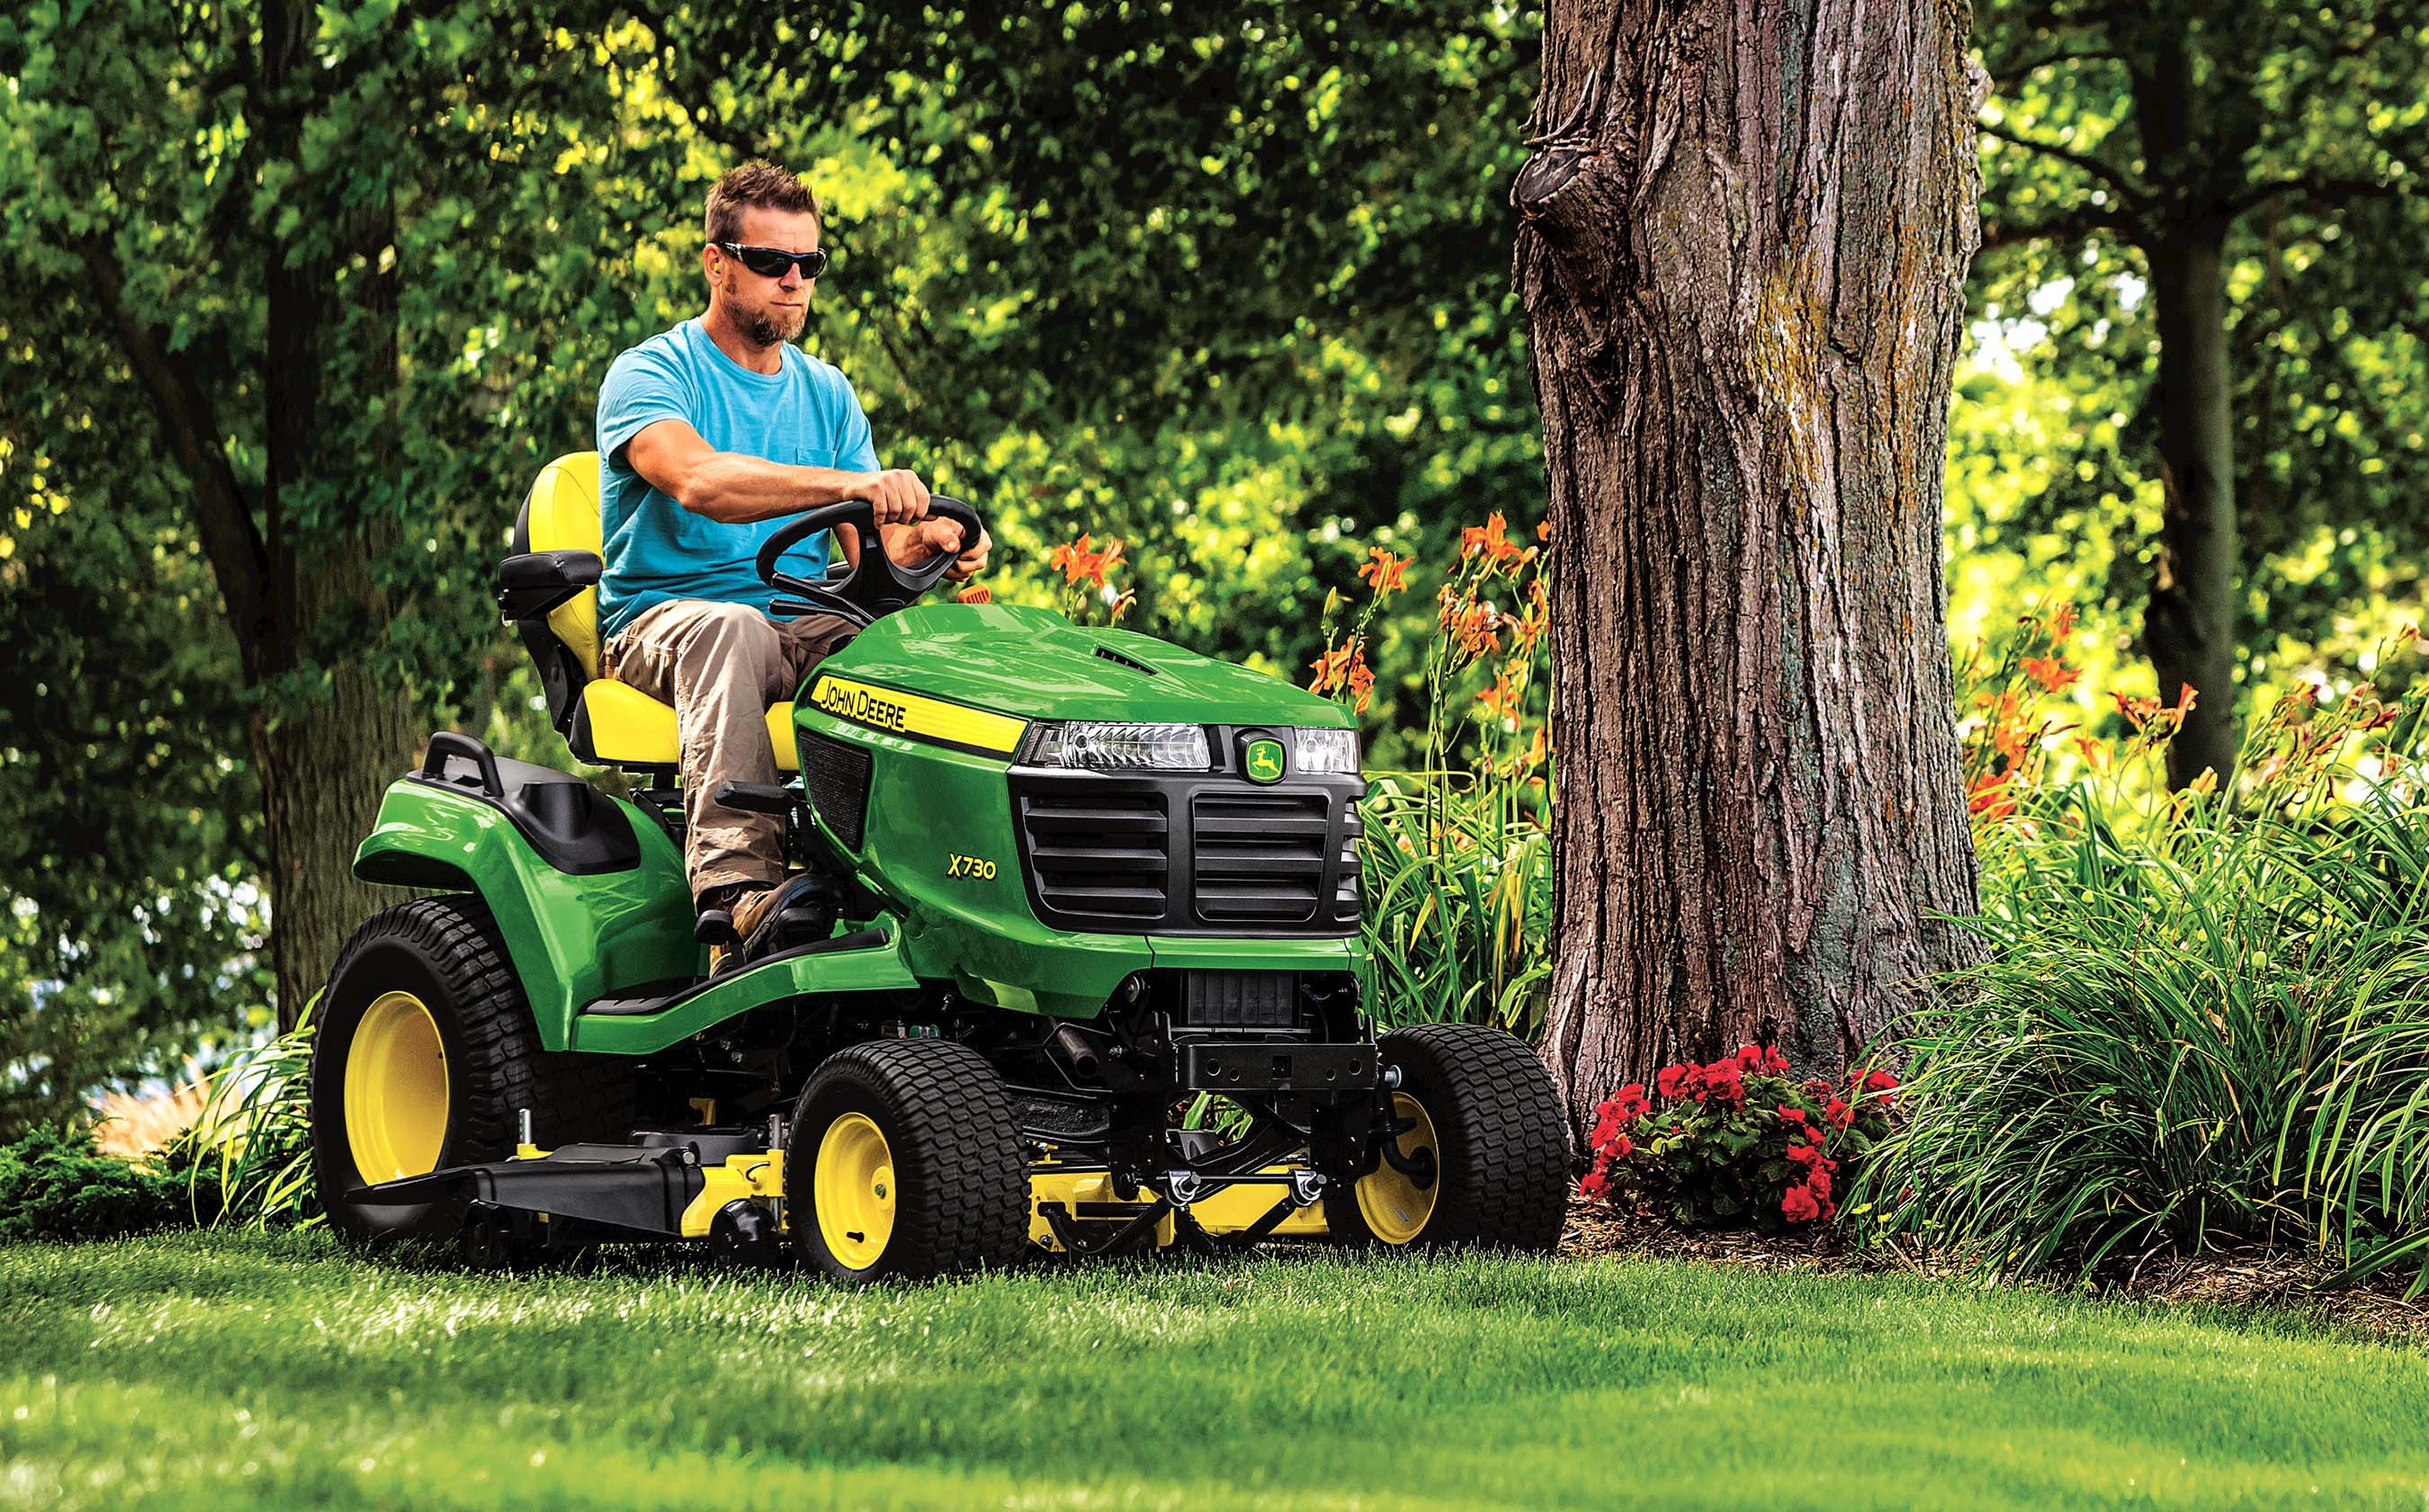 The John Deere X730 Signature Series tractor is powered by a V-twin, liquid-cooled John Deere iTorque™ power system with electronic fuel injection (EFI) to handle even the toughest of property care tasks.